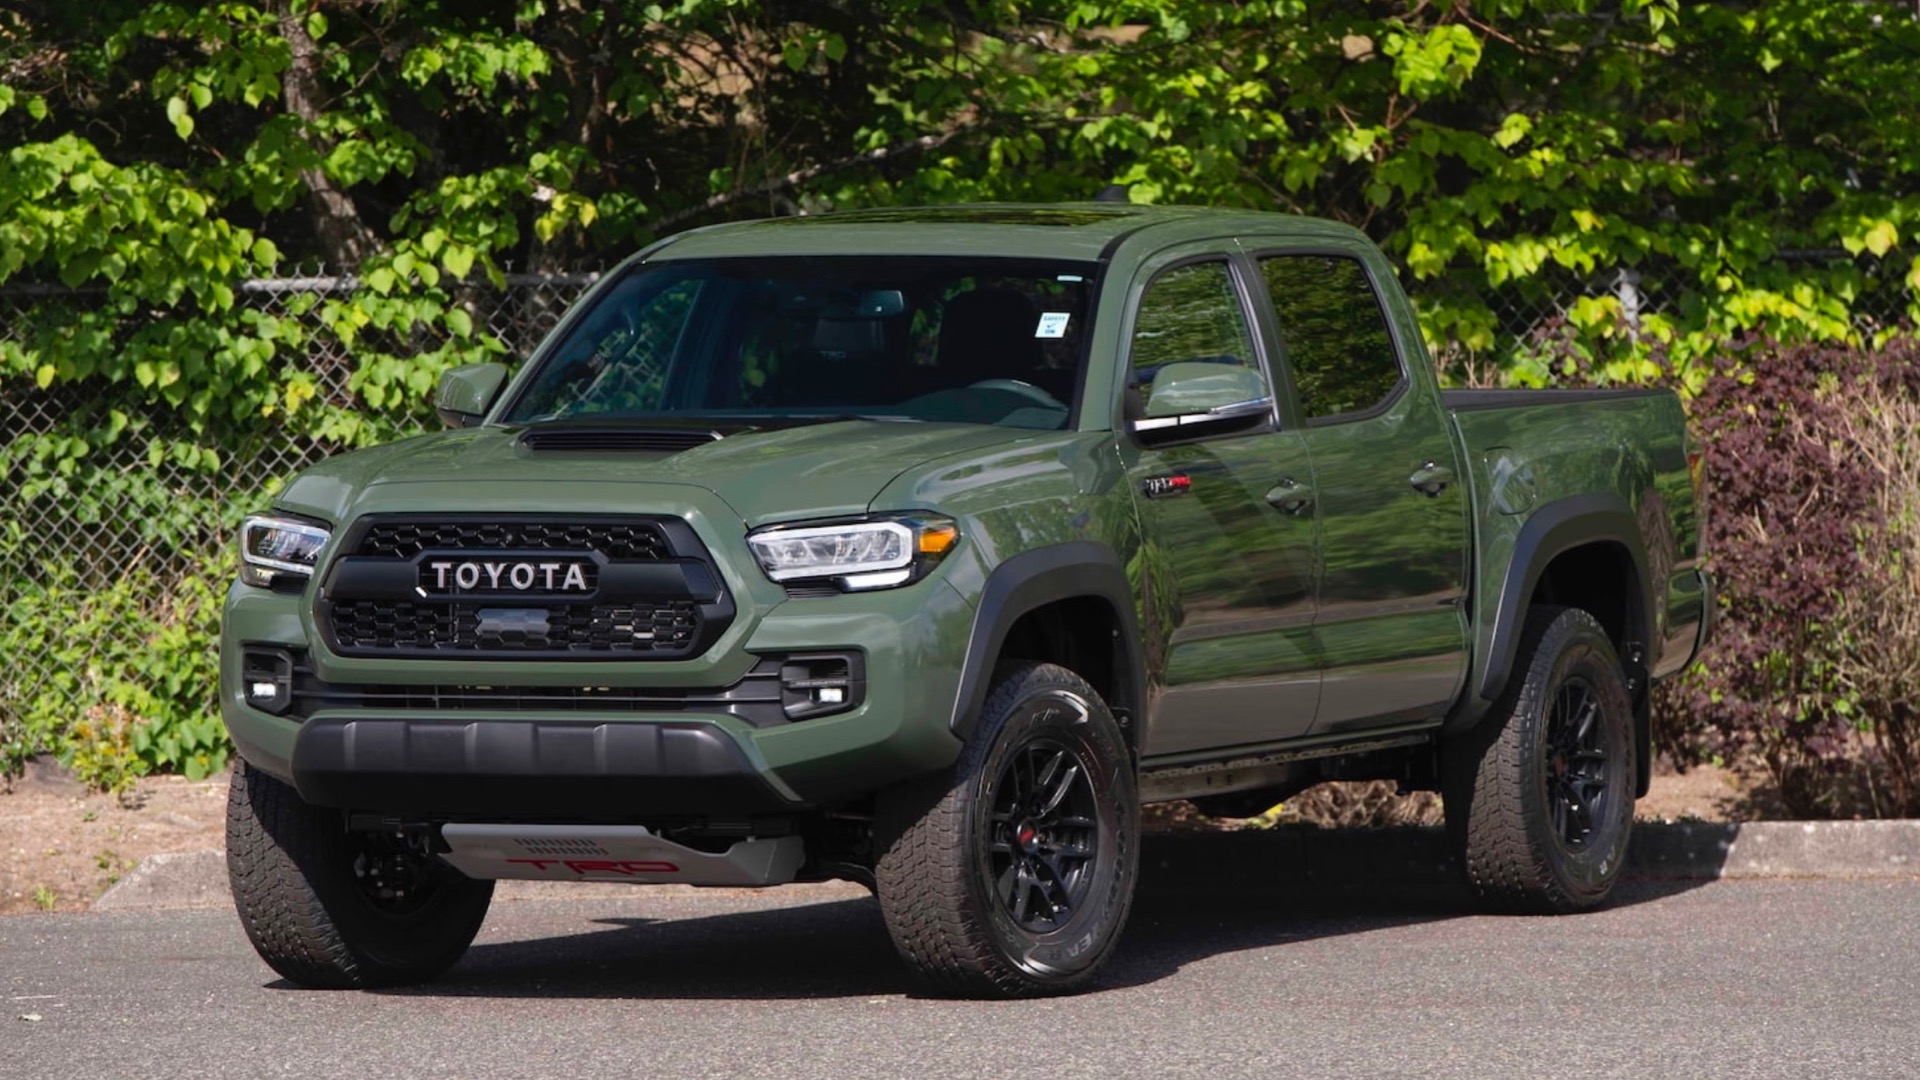 One-millionth Toyota Tacoma is a TRD Pro, and it's headed to auction